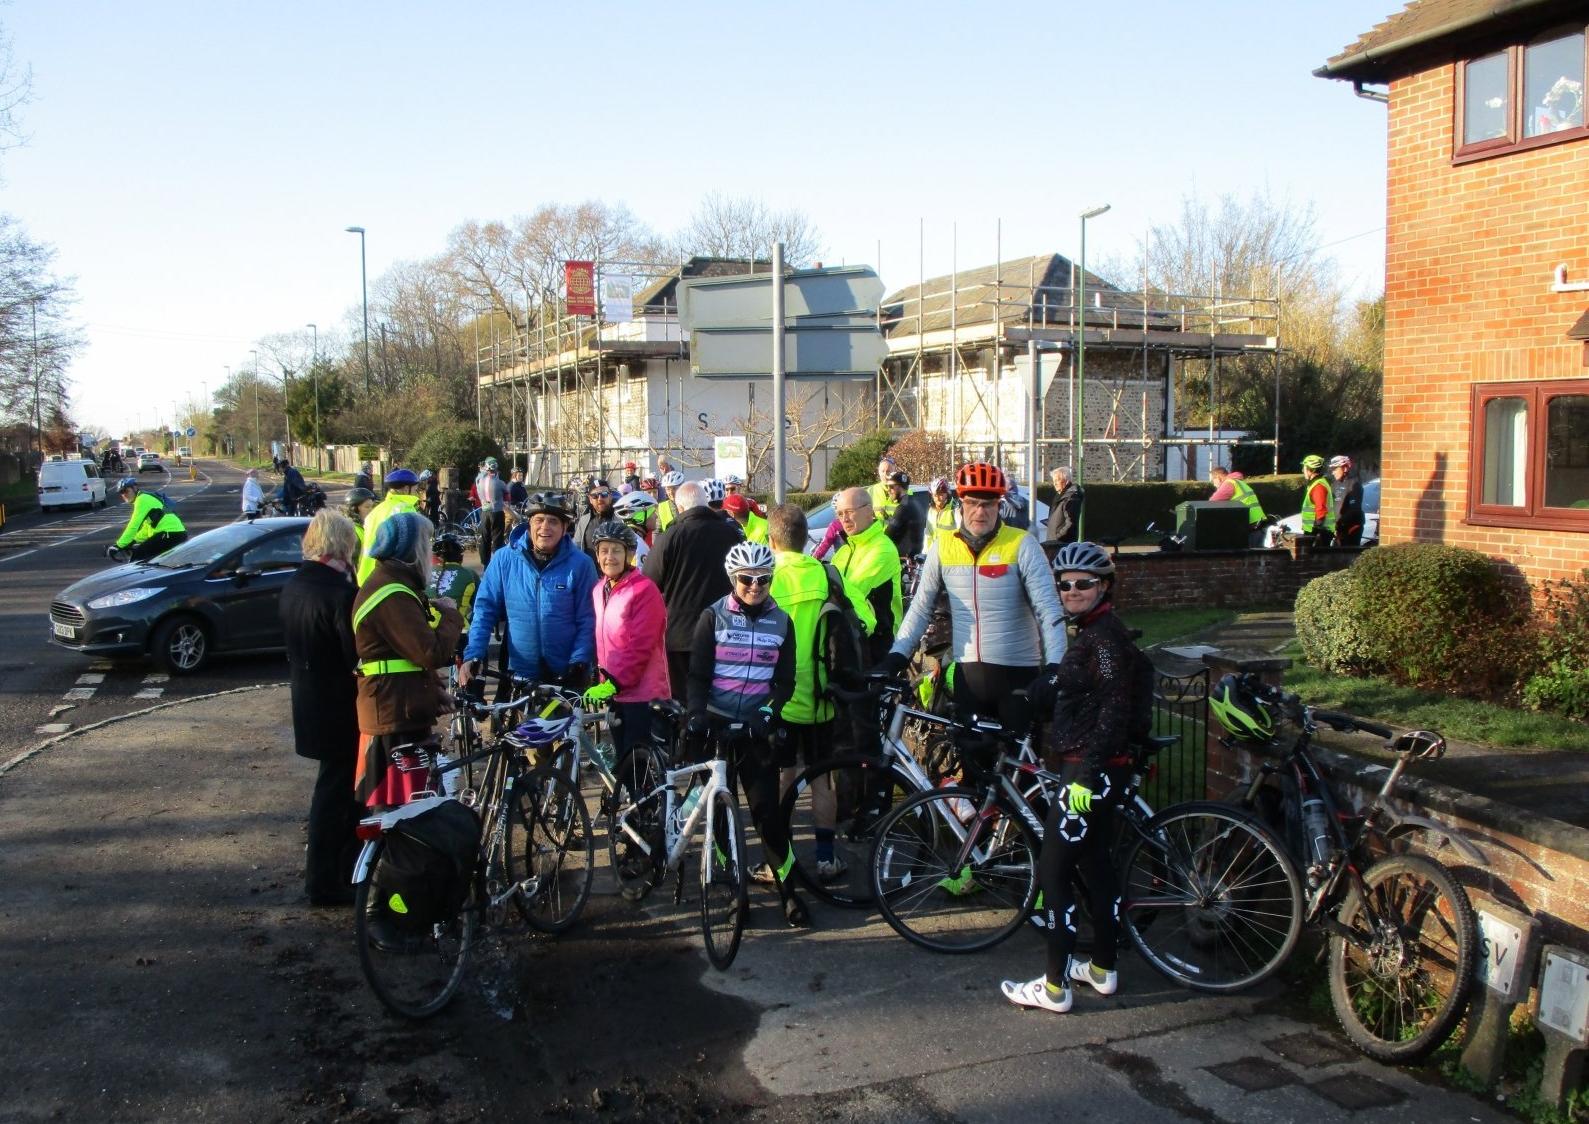 Following the death of well-known Bosham cyclist Gina McWilliam, a group of campaigners paid their respects and appealed for changes to the inadequate road system at a well-attended event on Sunday. SUS-200122-104535001